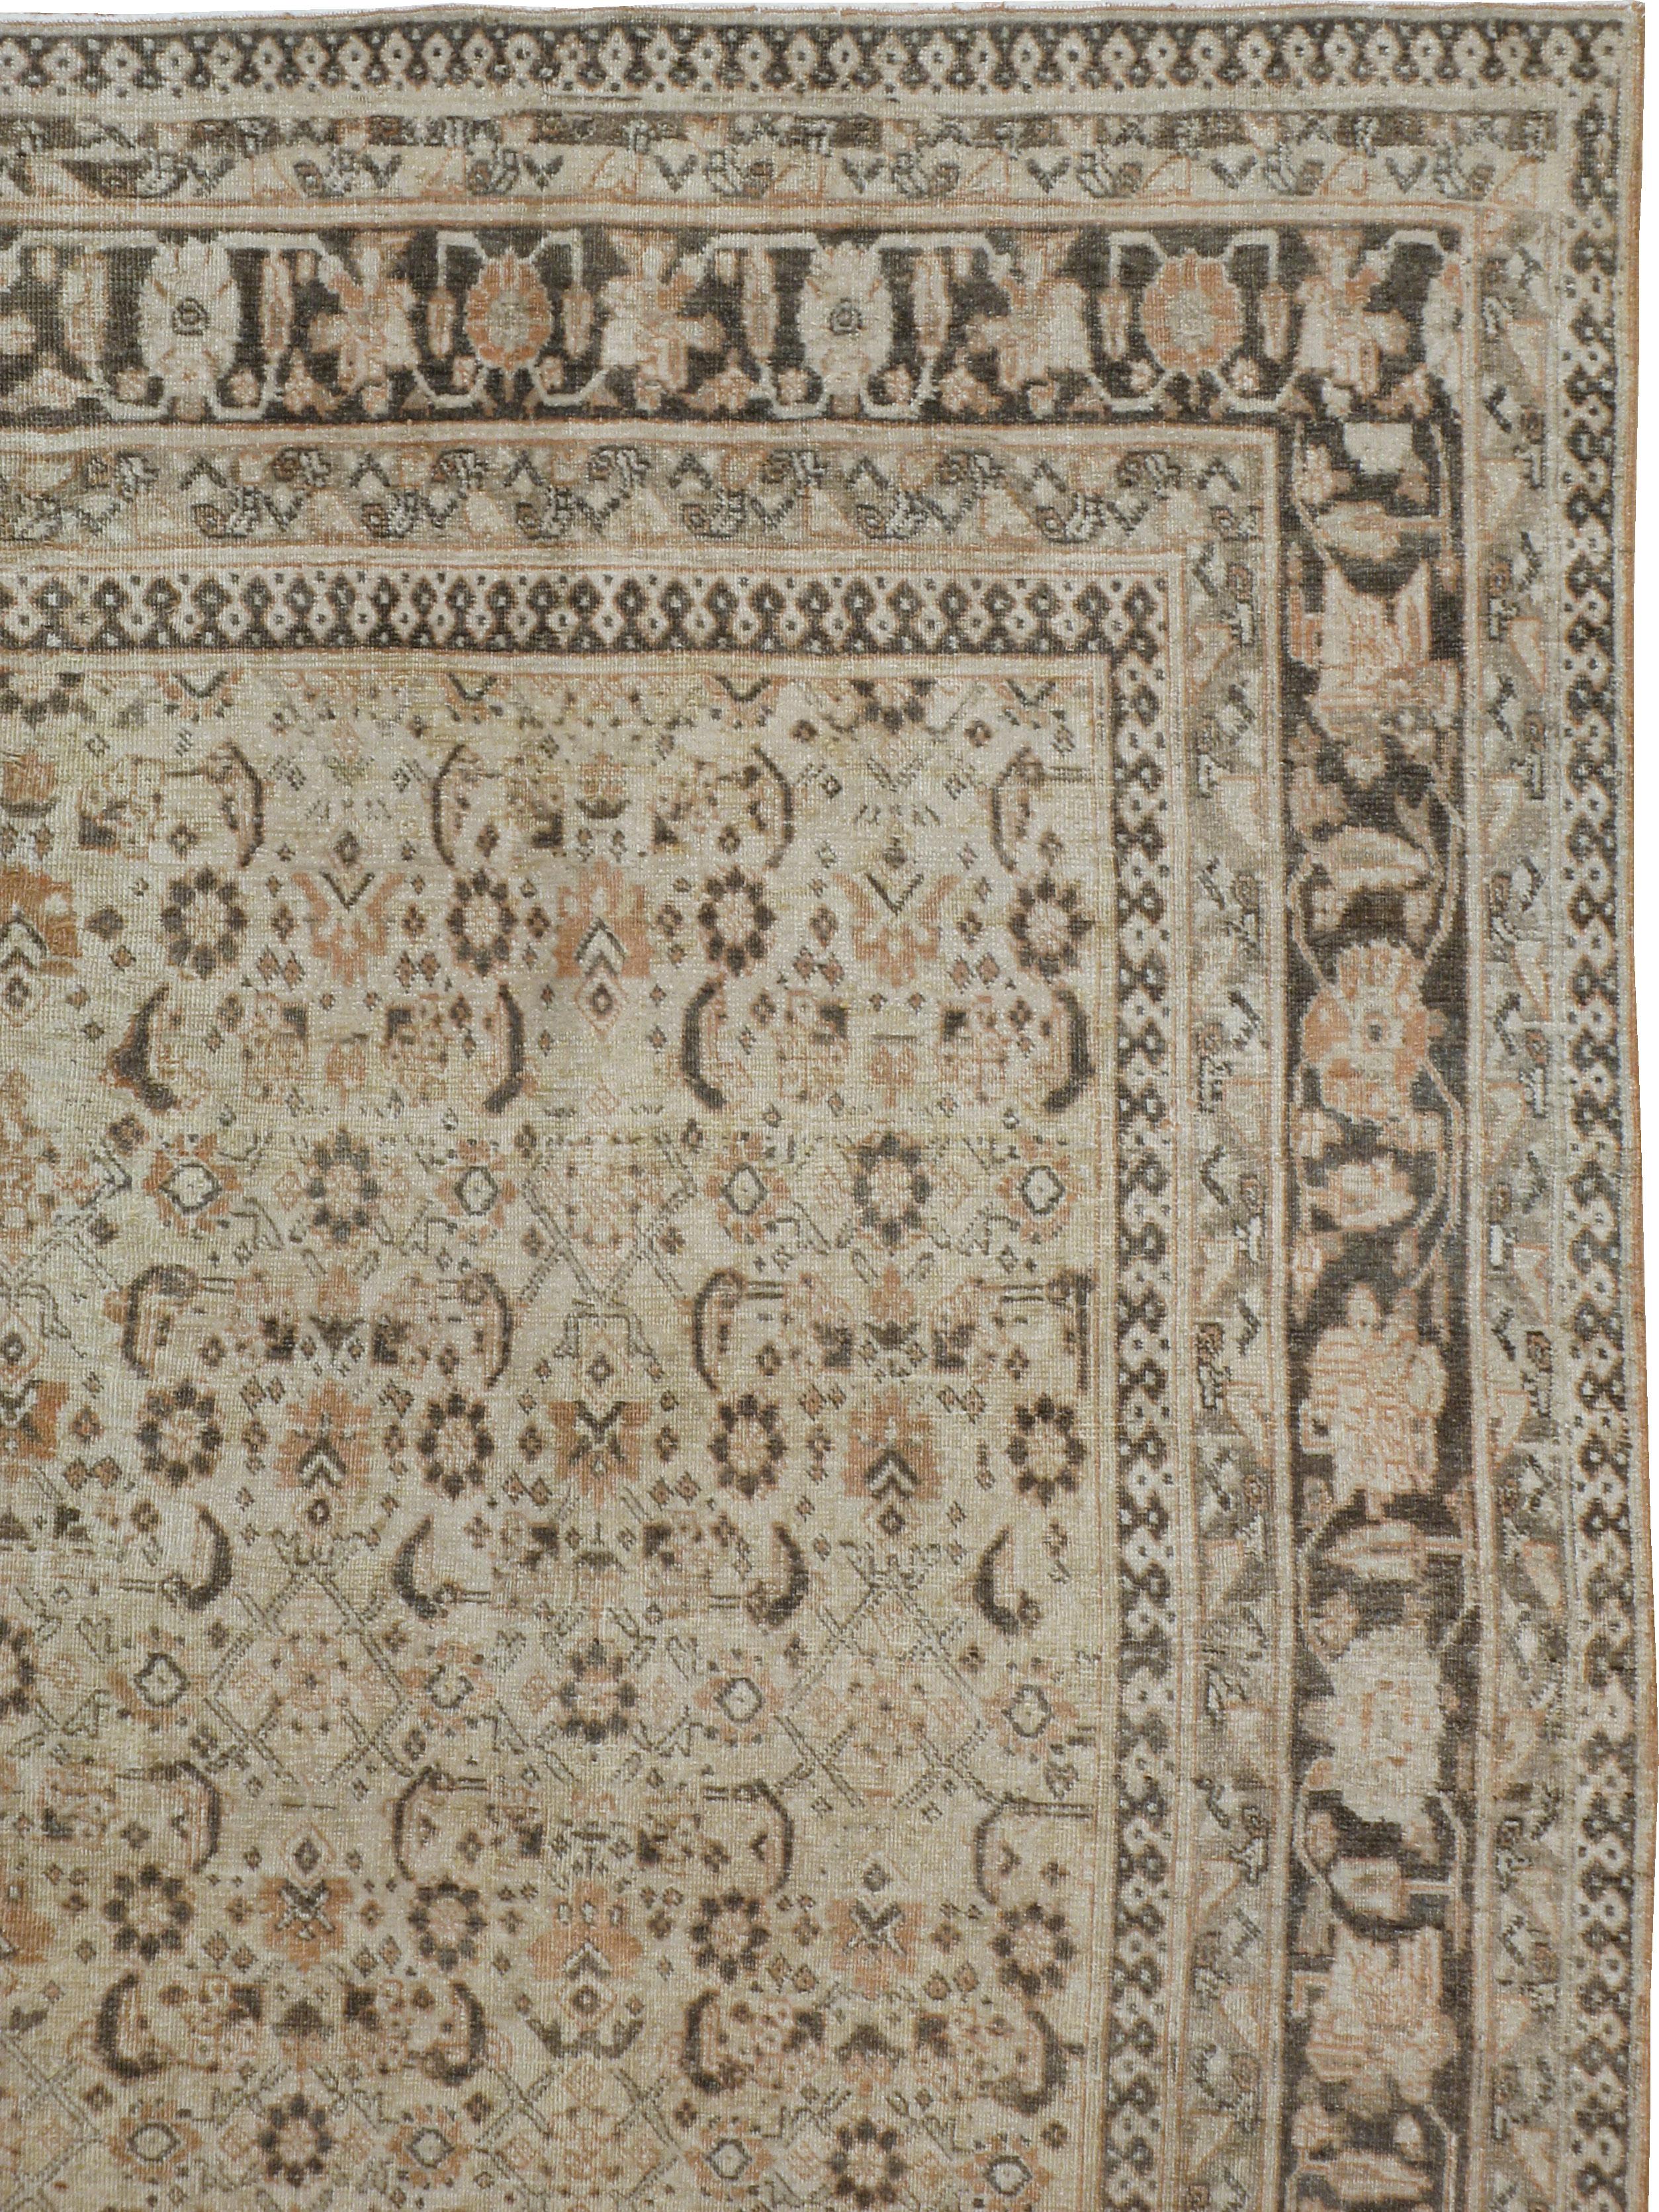 Antique Persian Tabriz Carpet In Good Condition For Sale In New York, NY